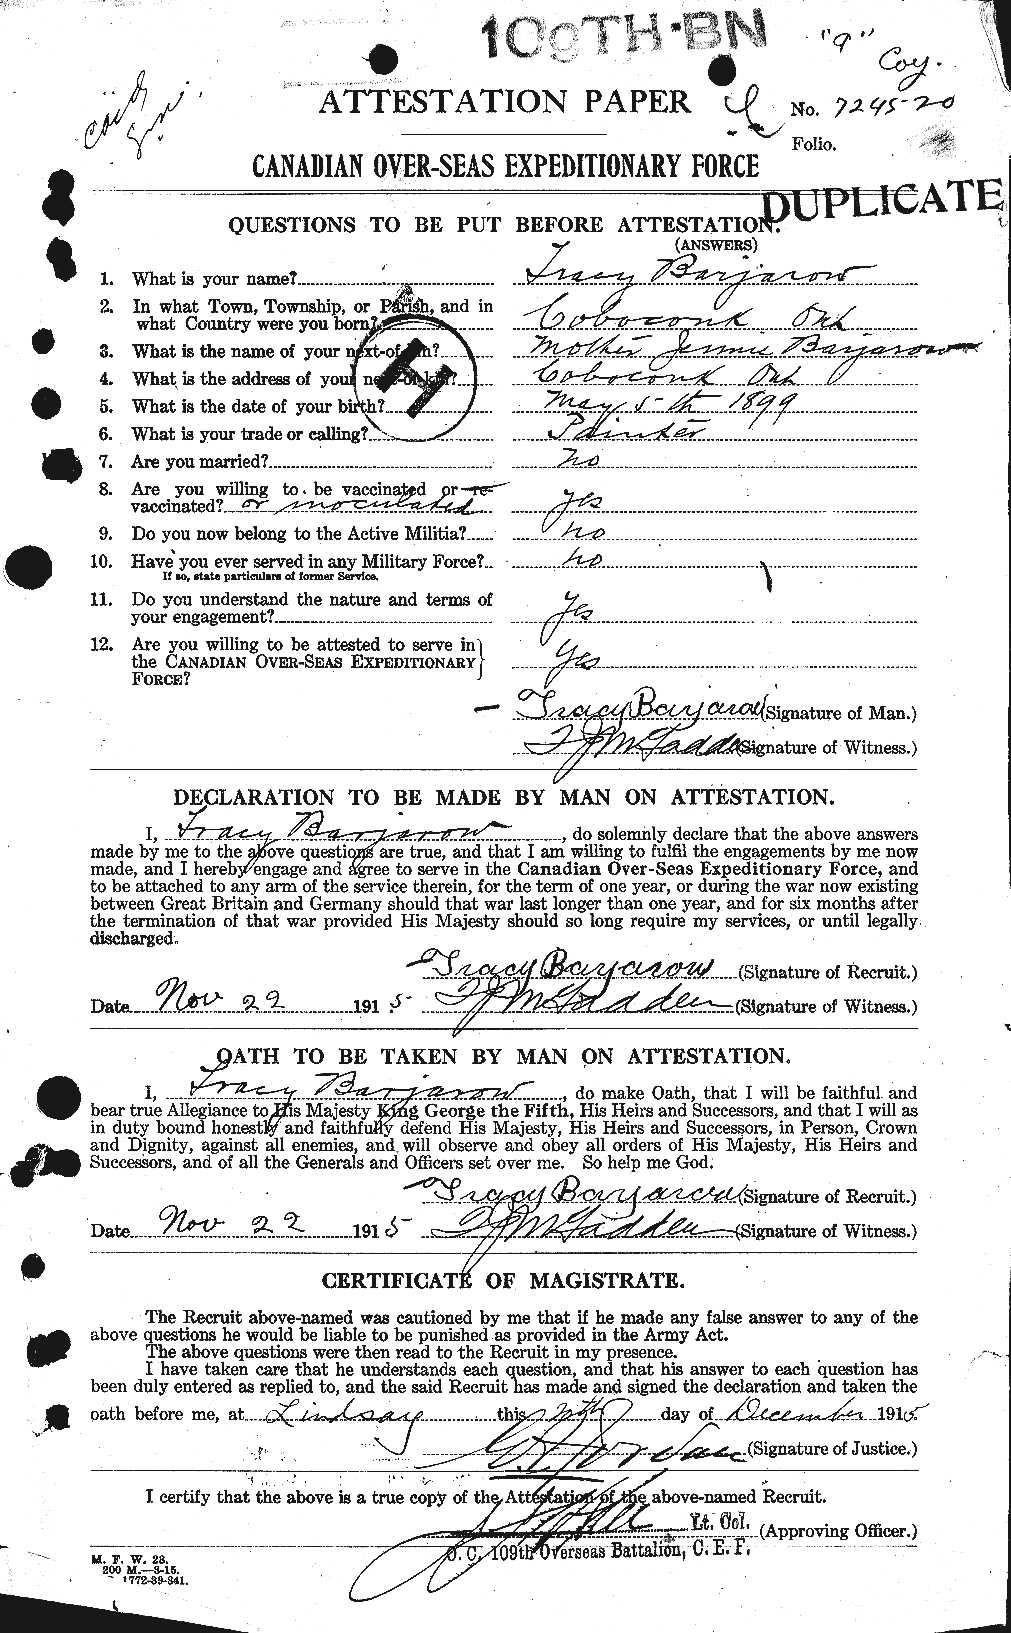 Personnel Records of the First World War - CEF 220621a